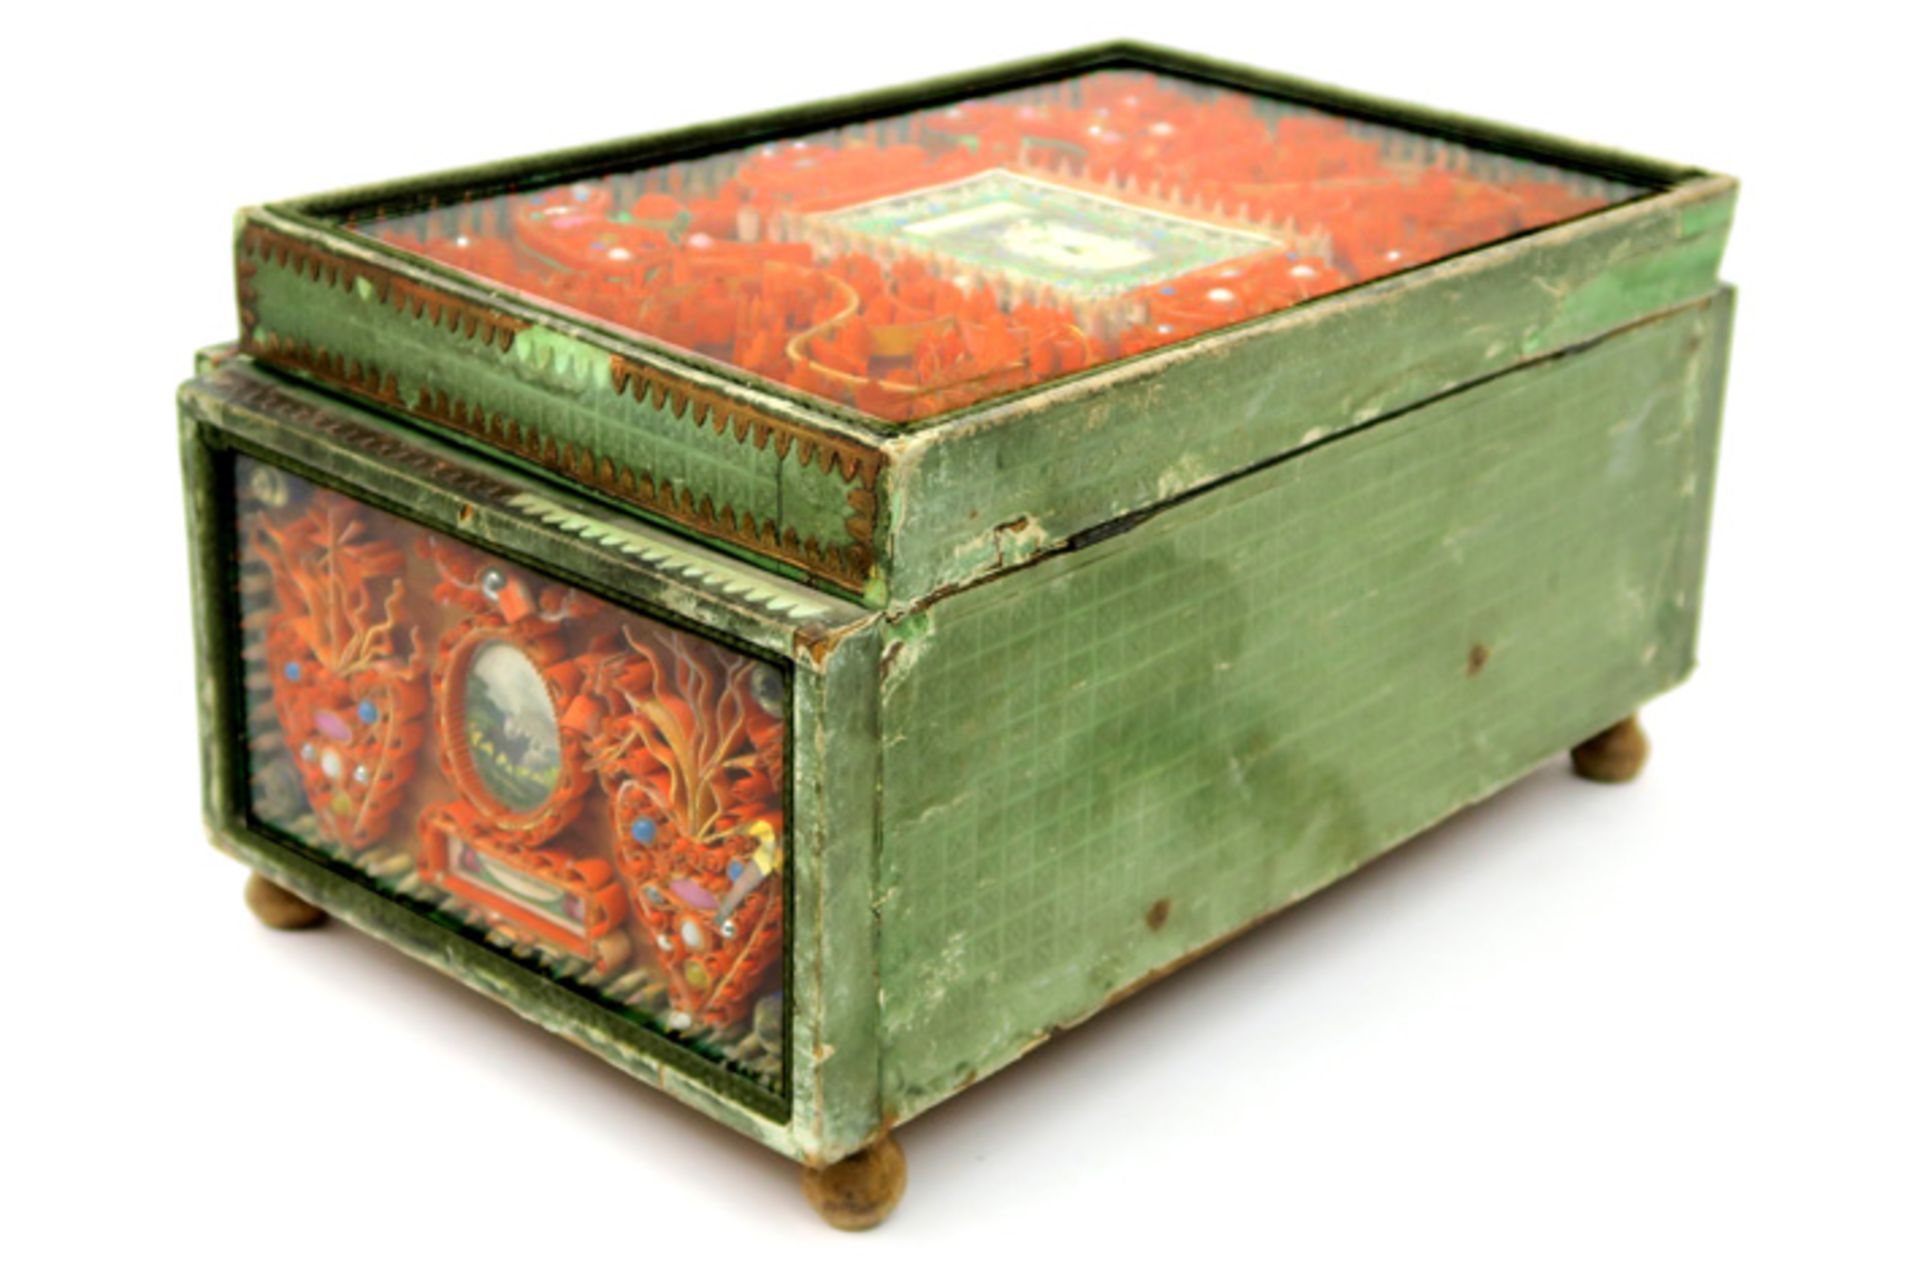 19th "Folk Art" box in painted wood and glass with relics VOLKSKUNST - 19° EEUW kistje in - Bild 5 aus 5